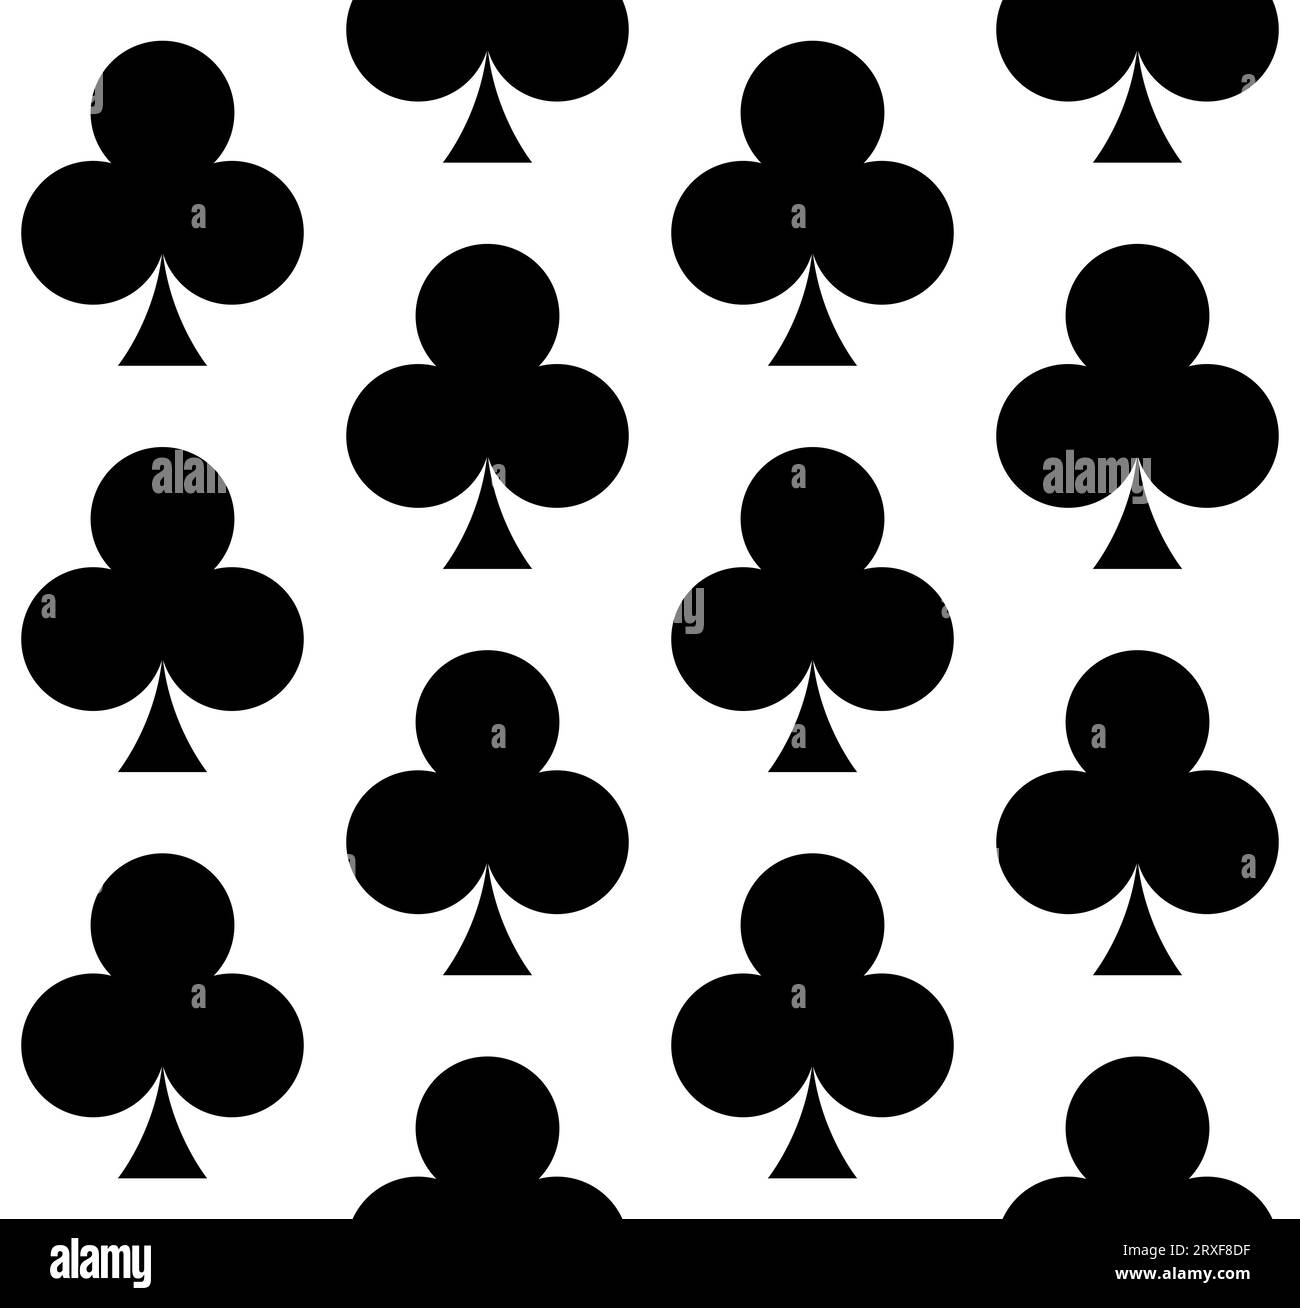 Clubs playing card suit symbol - seamless repeatable pattern texture Stock Vector